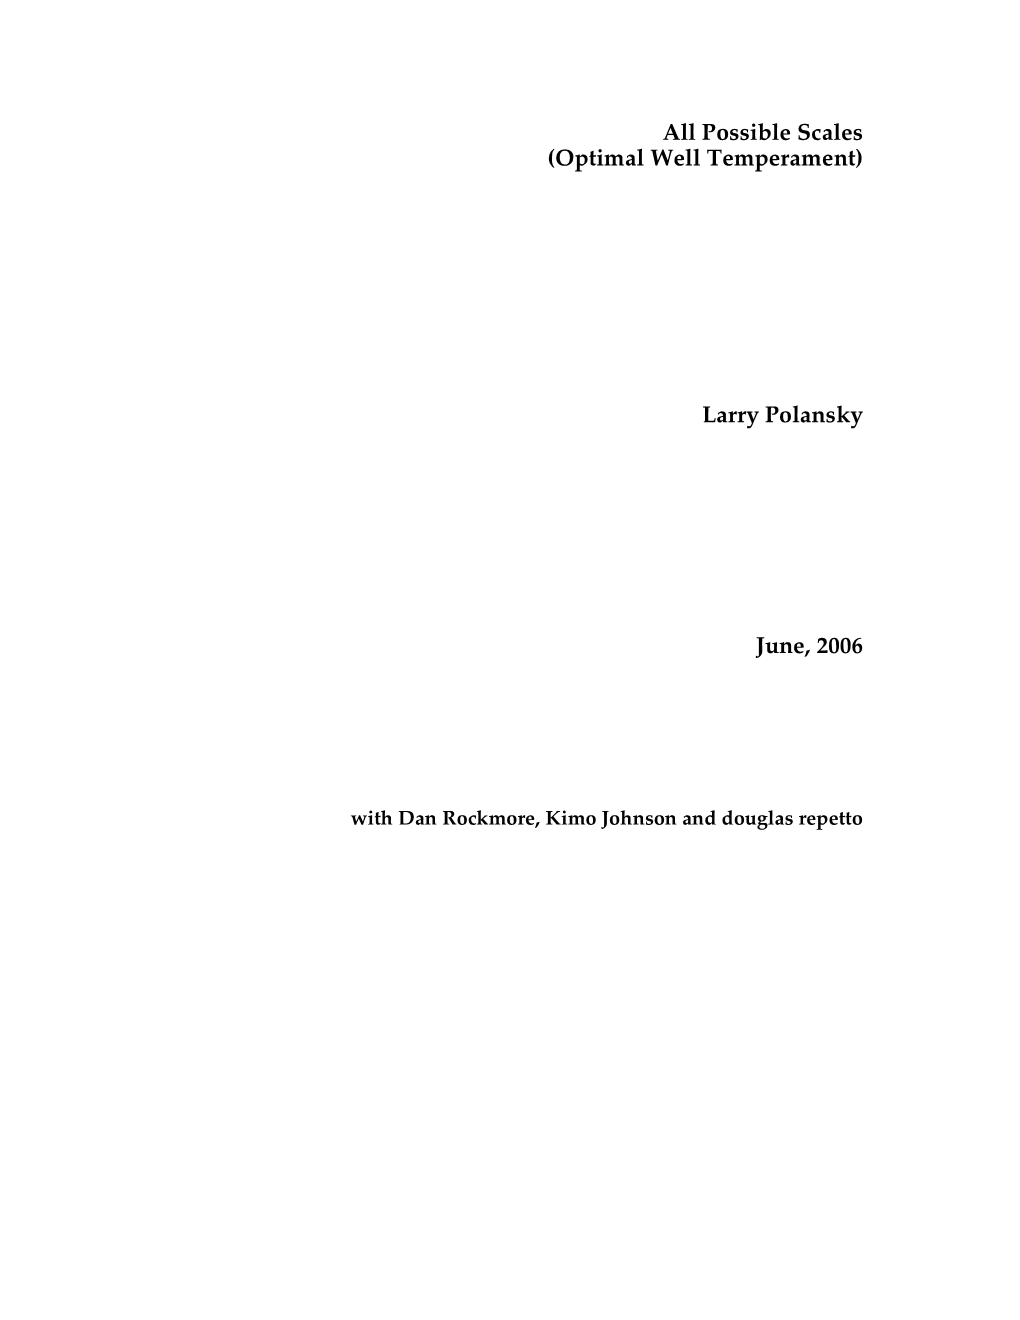 All Possible Scales (Optimal Well Temperament) Larry Polansky June, 2006